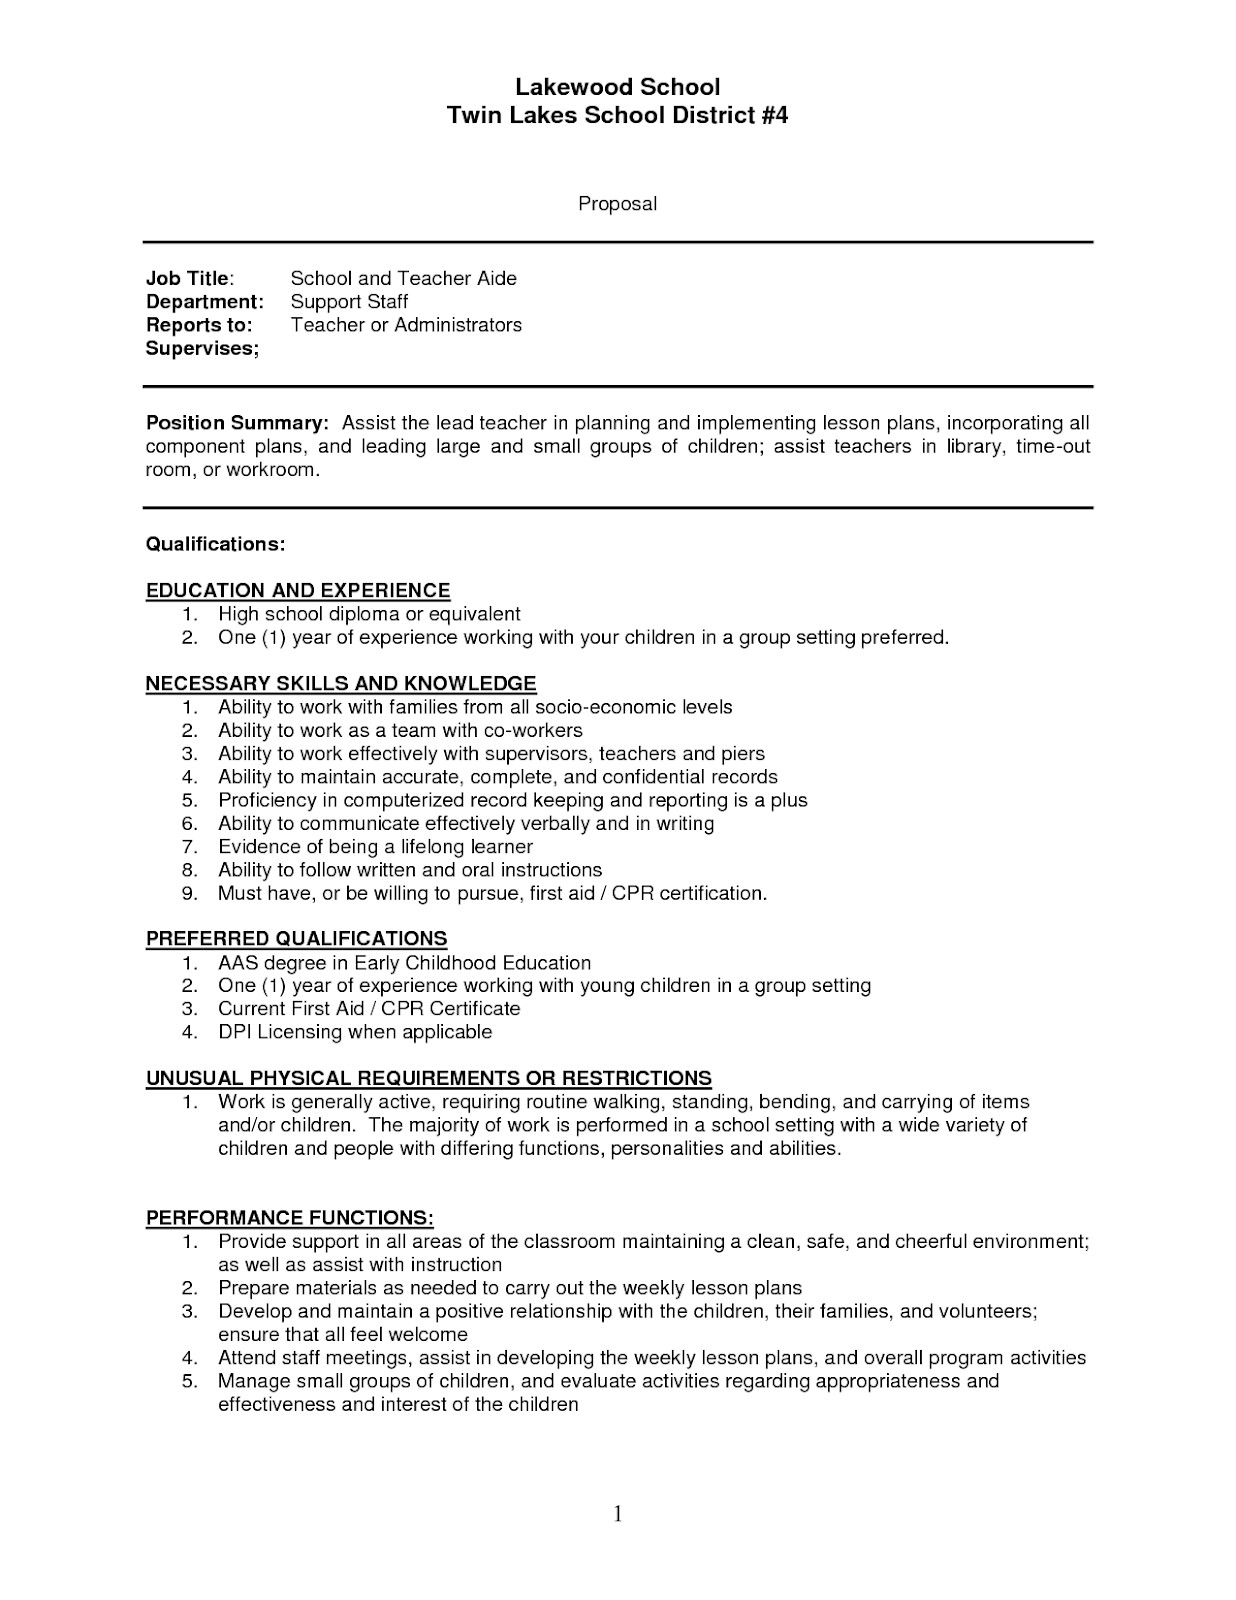 Sample Resume for Teaching Position with No Experience Teacher assistant Resume Sample Teacher assistant Resume